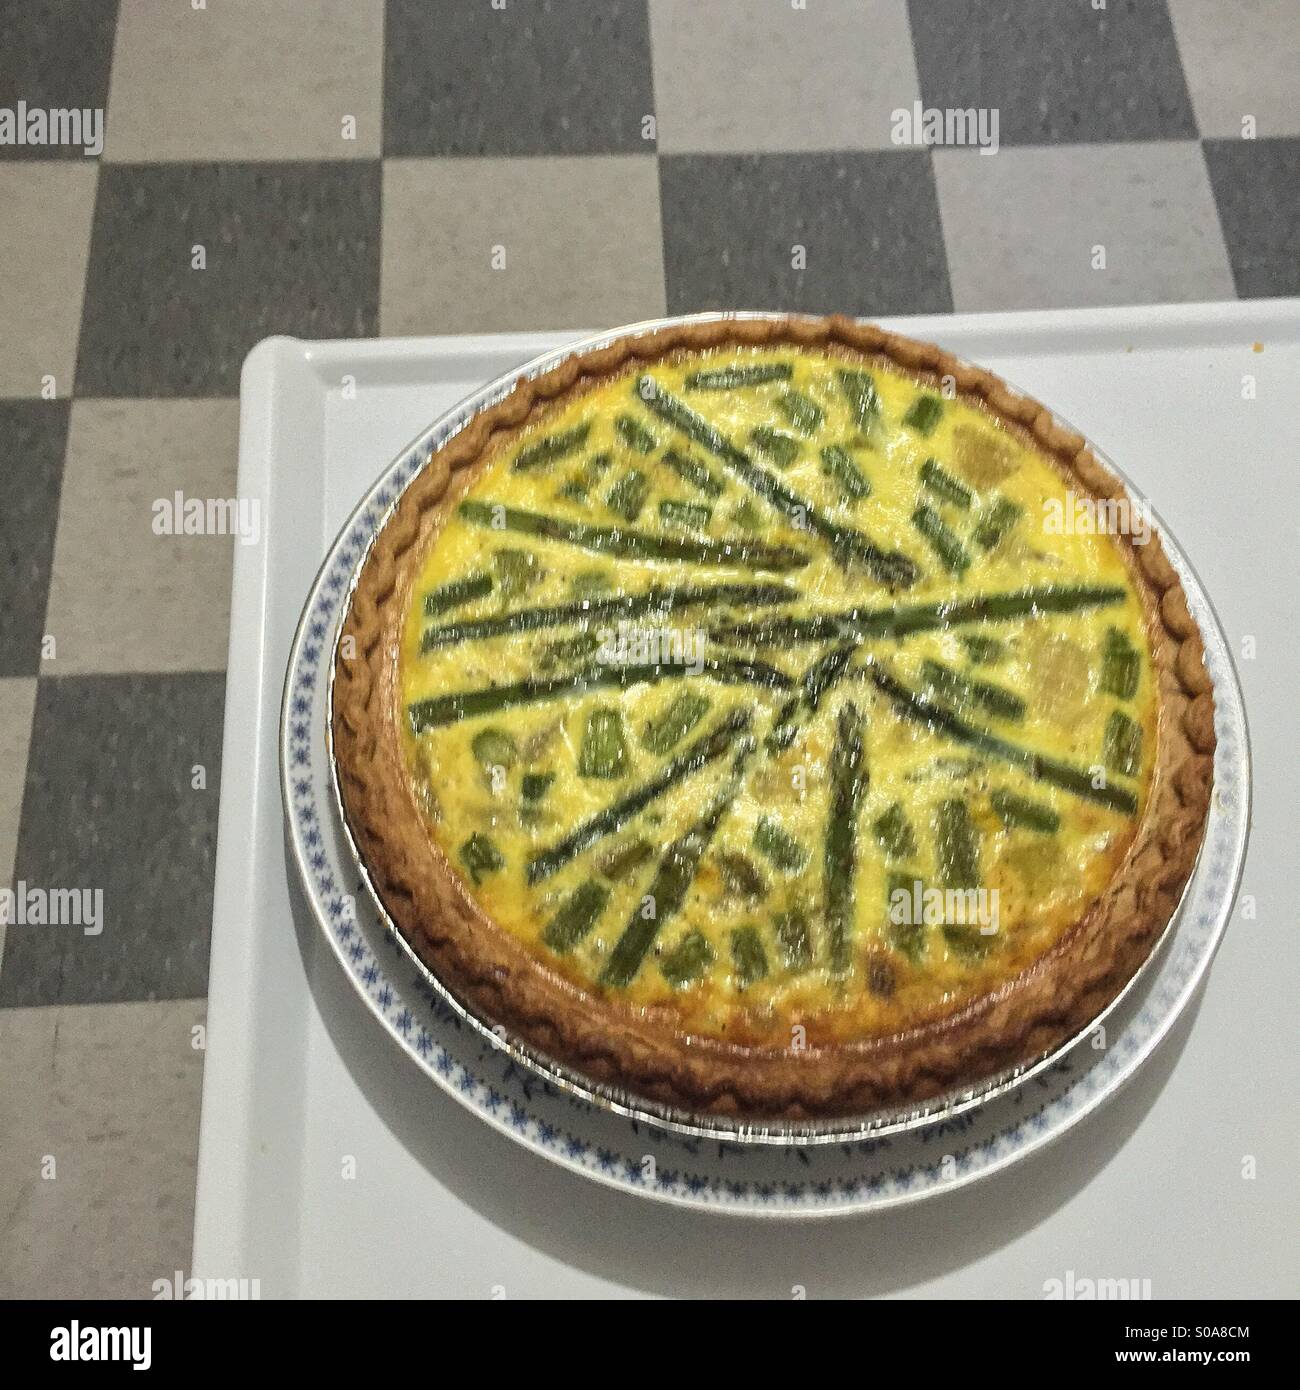 Asparagus quiche on counter Stock Photo